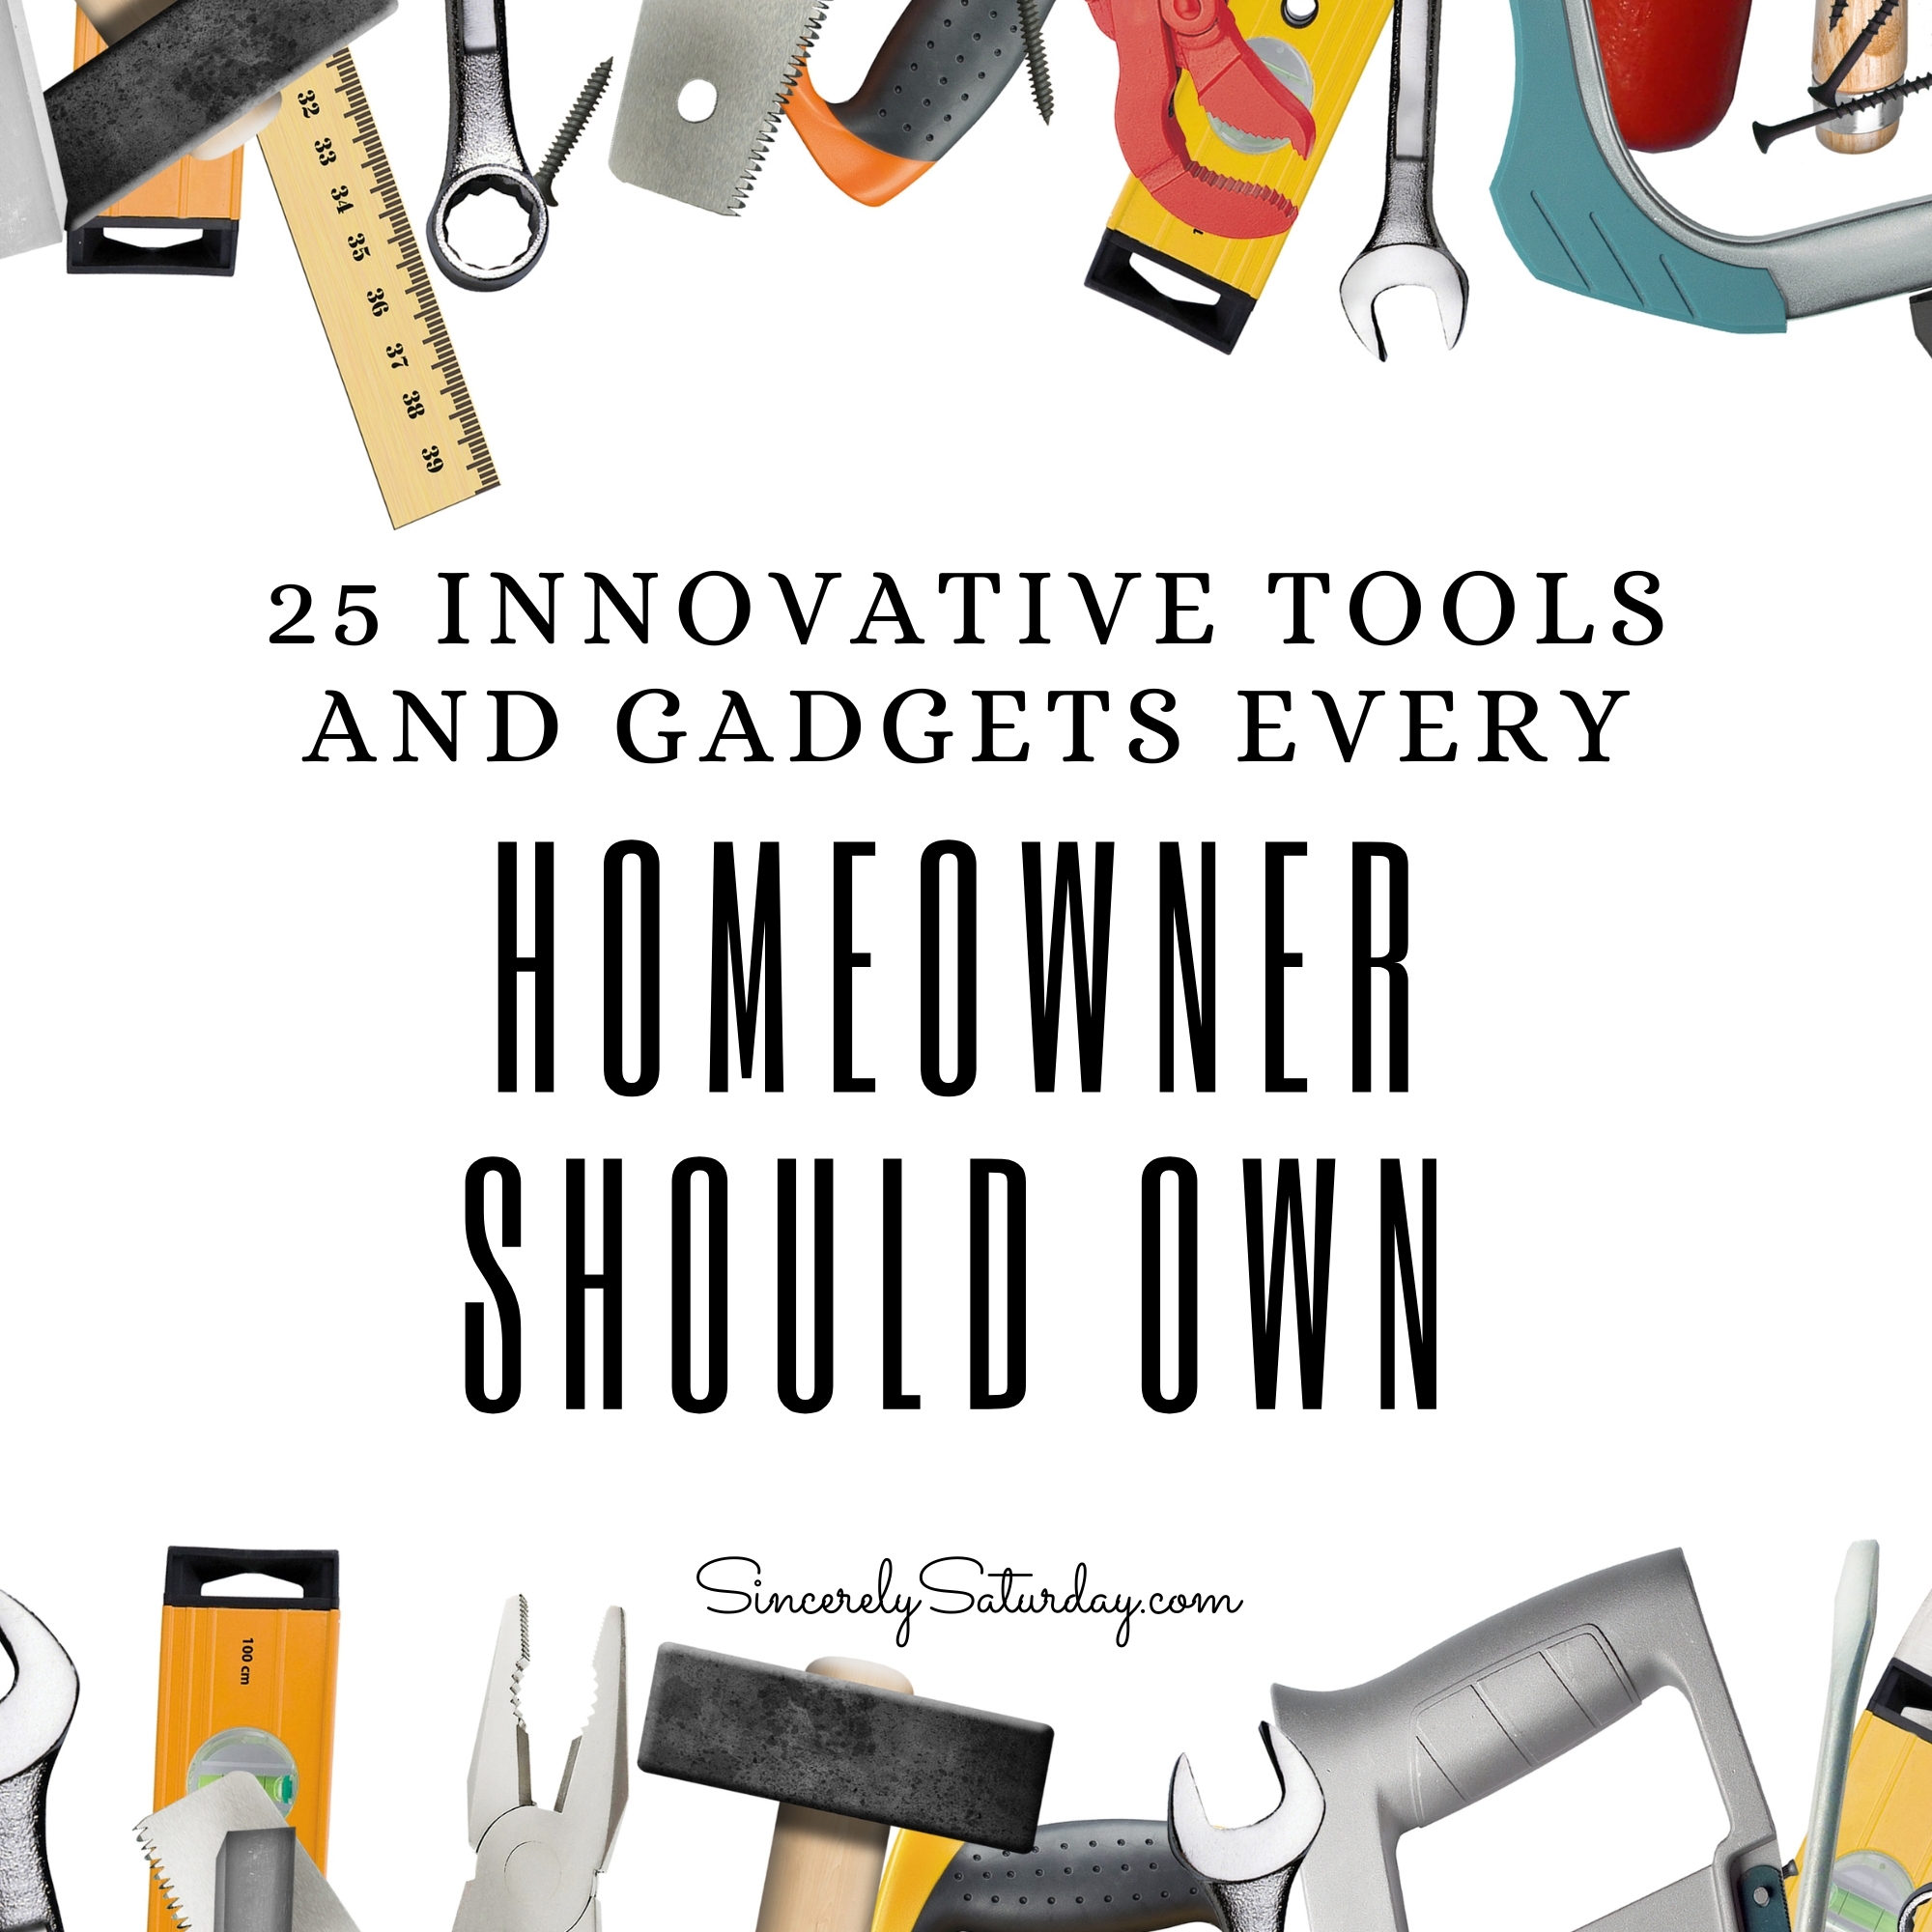 25 Innovative Tools and Gadgets Every Homeowner Should Own